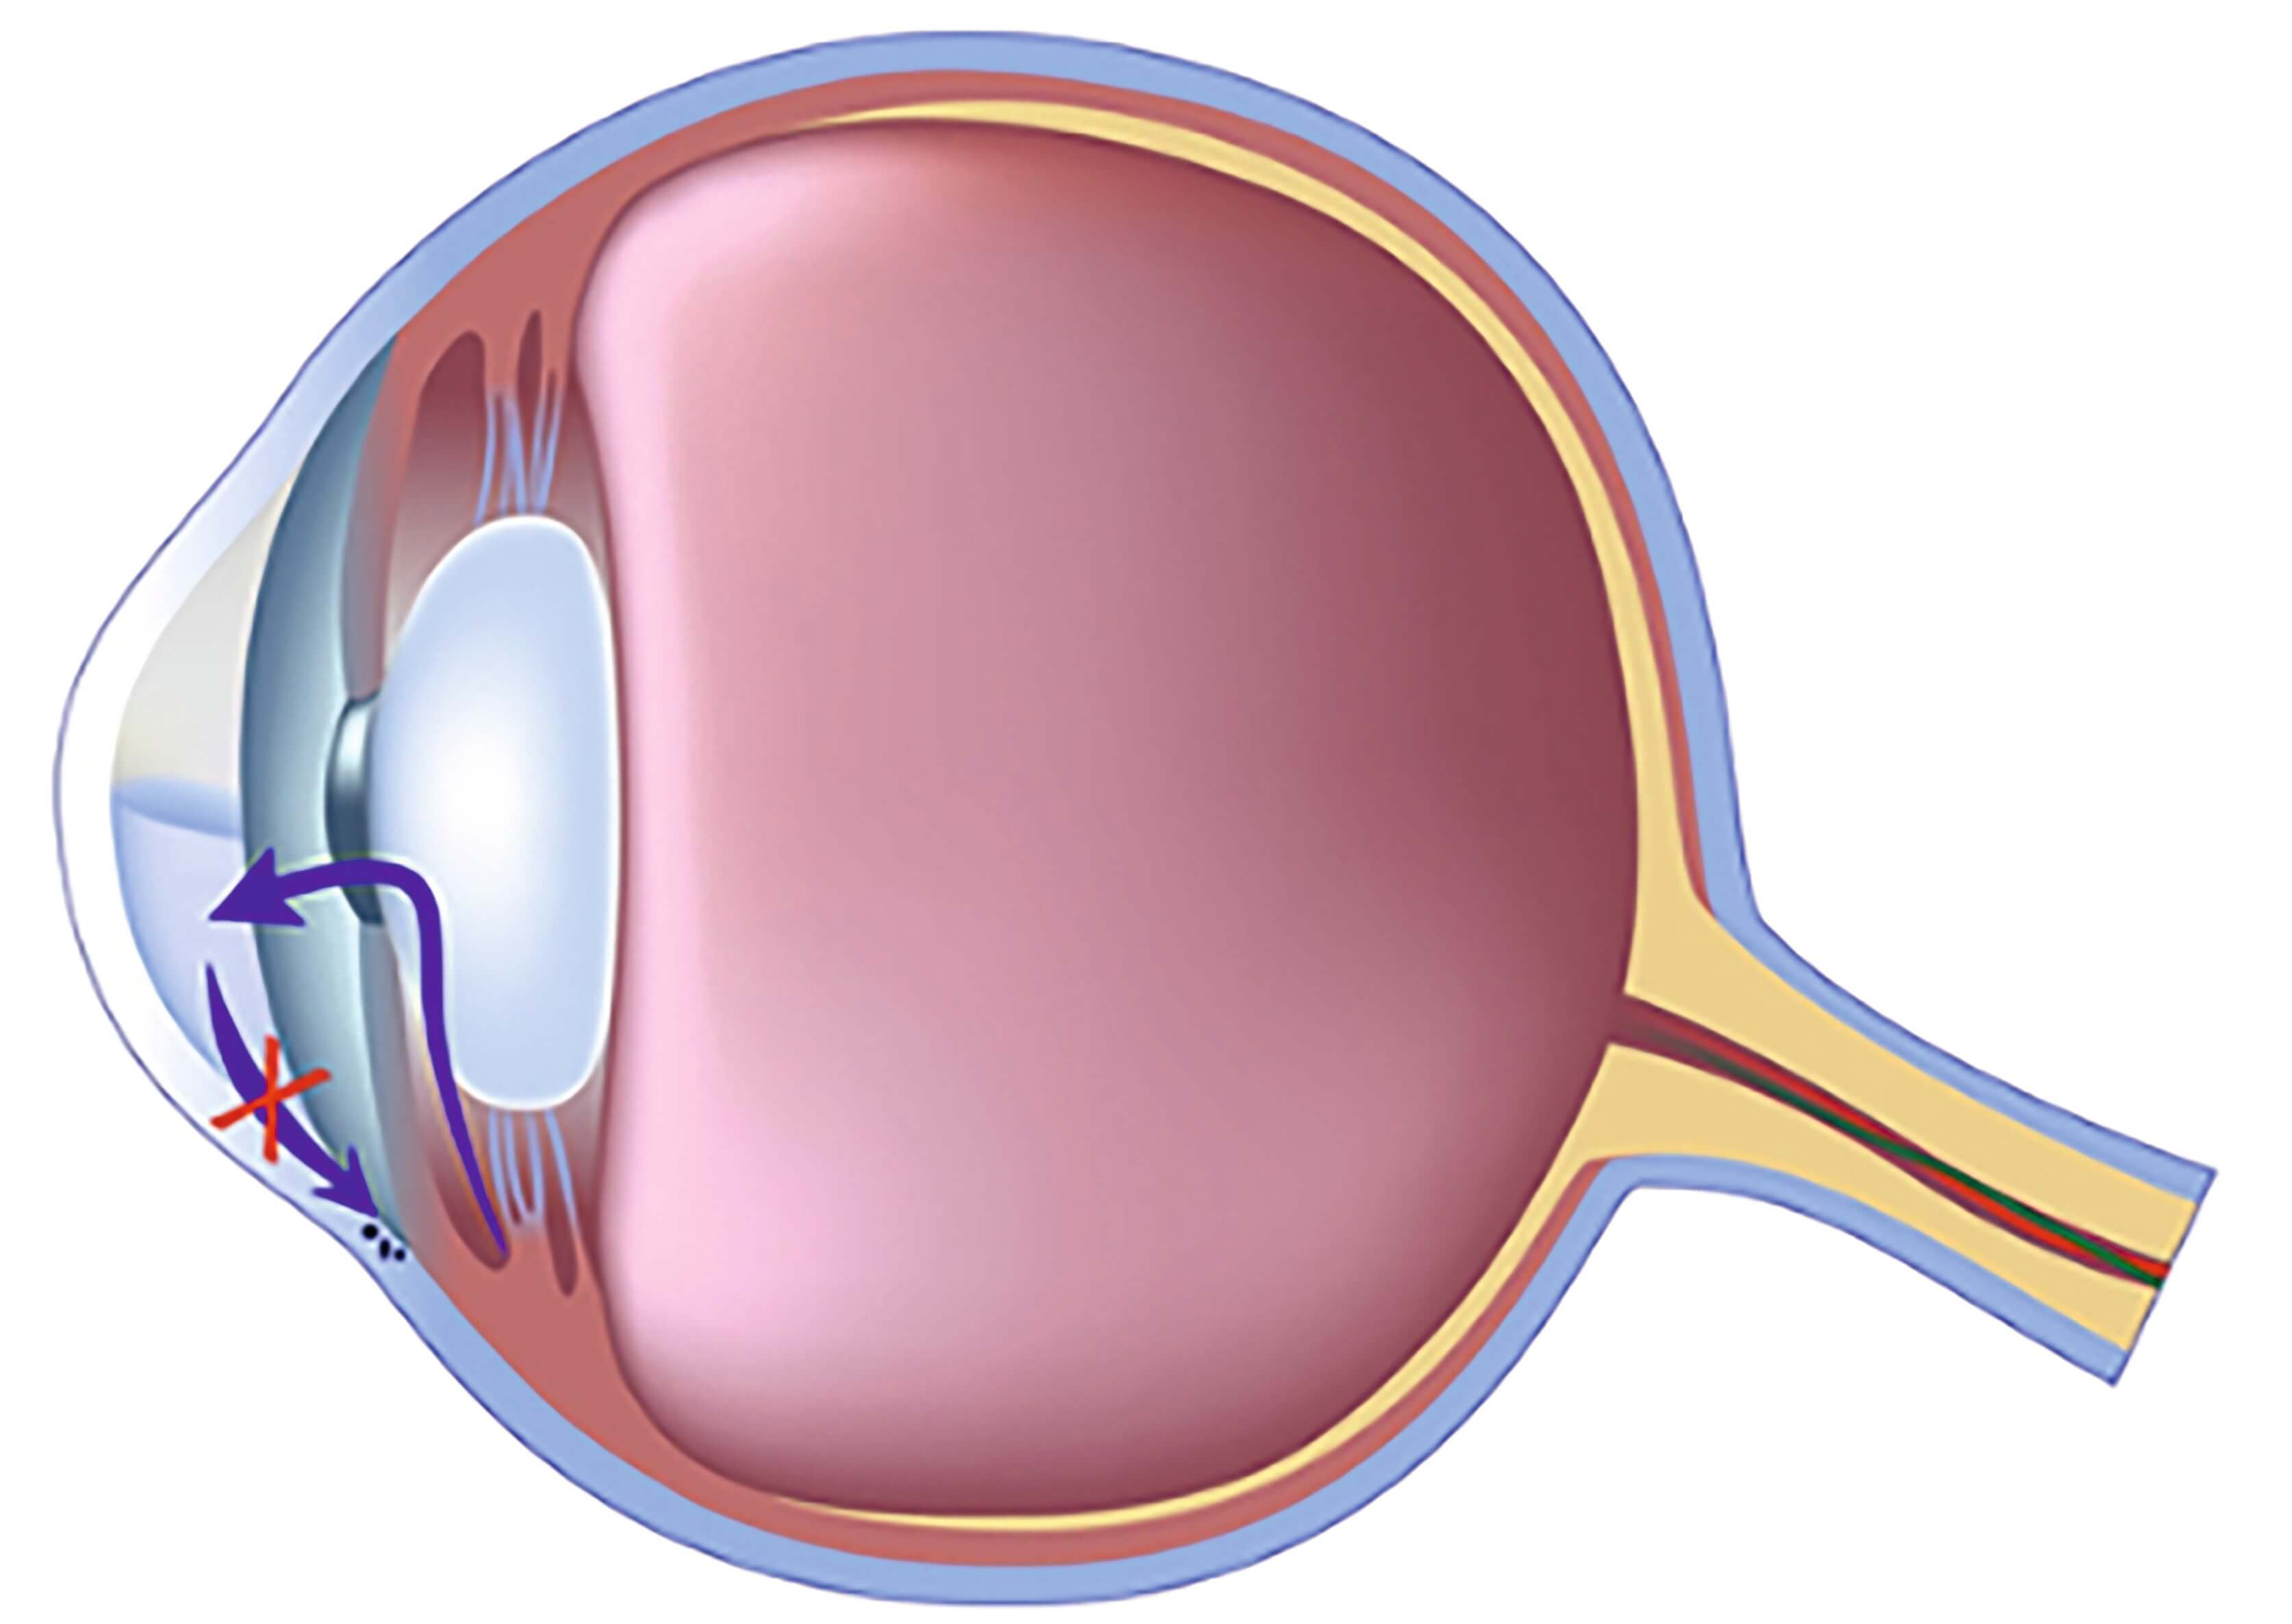 EYETECHCARE canal clogged aqueous humor builds up behind the cornea